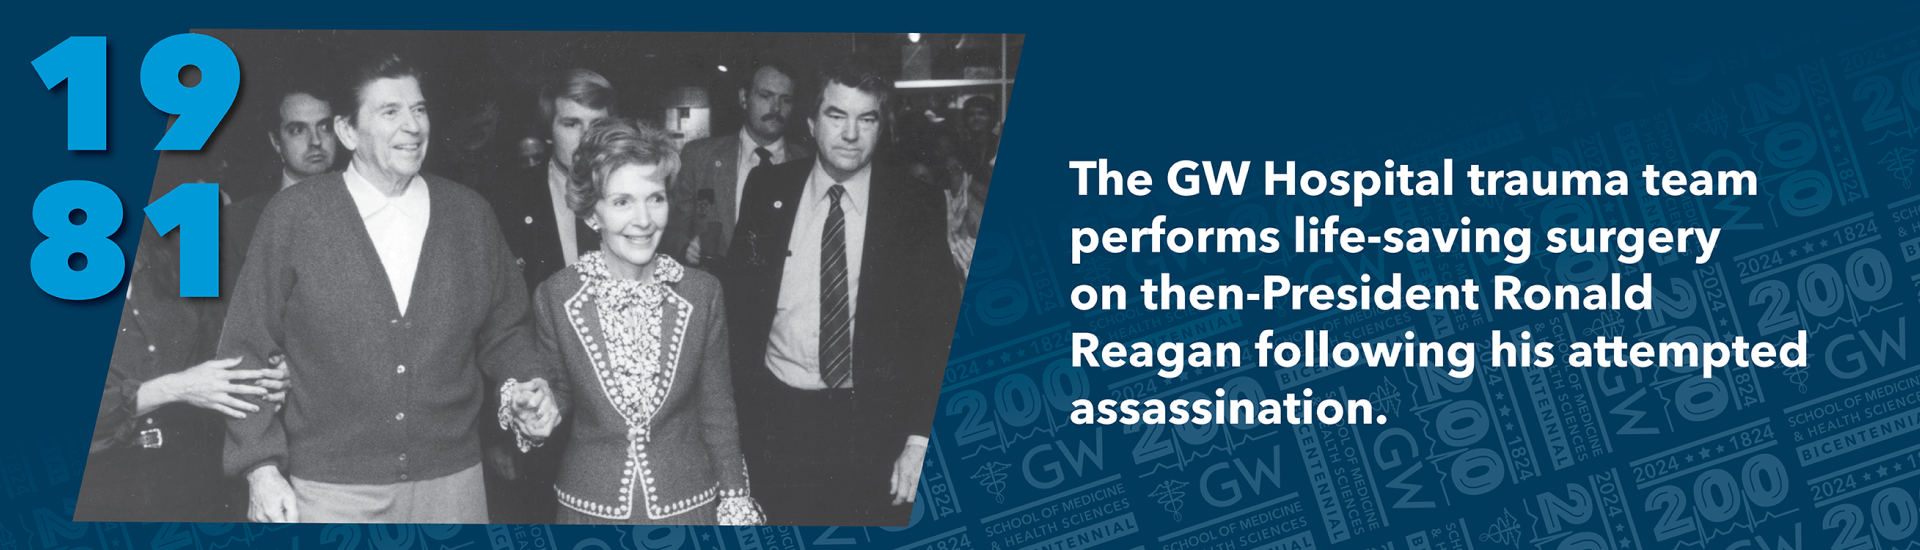 1981: The GW Hospital trauma team performs life-saving surgery on then-President Ronald Reagan following his attempted assassination. 